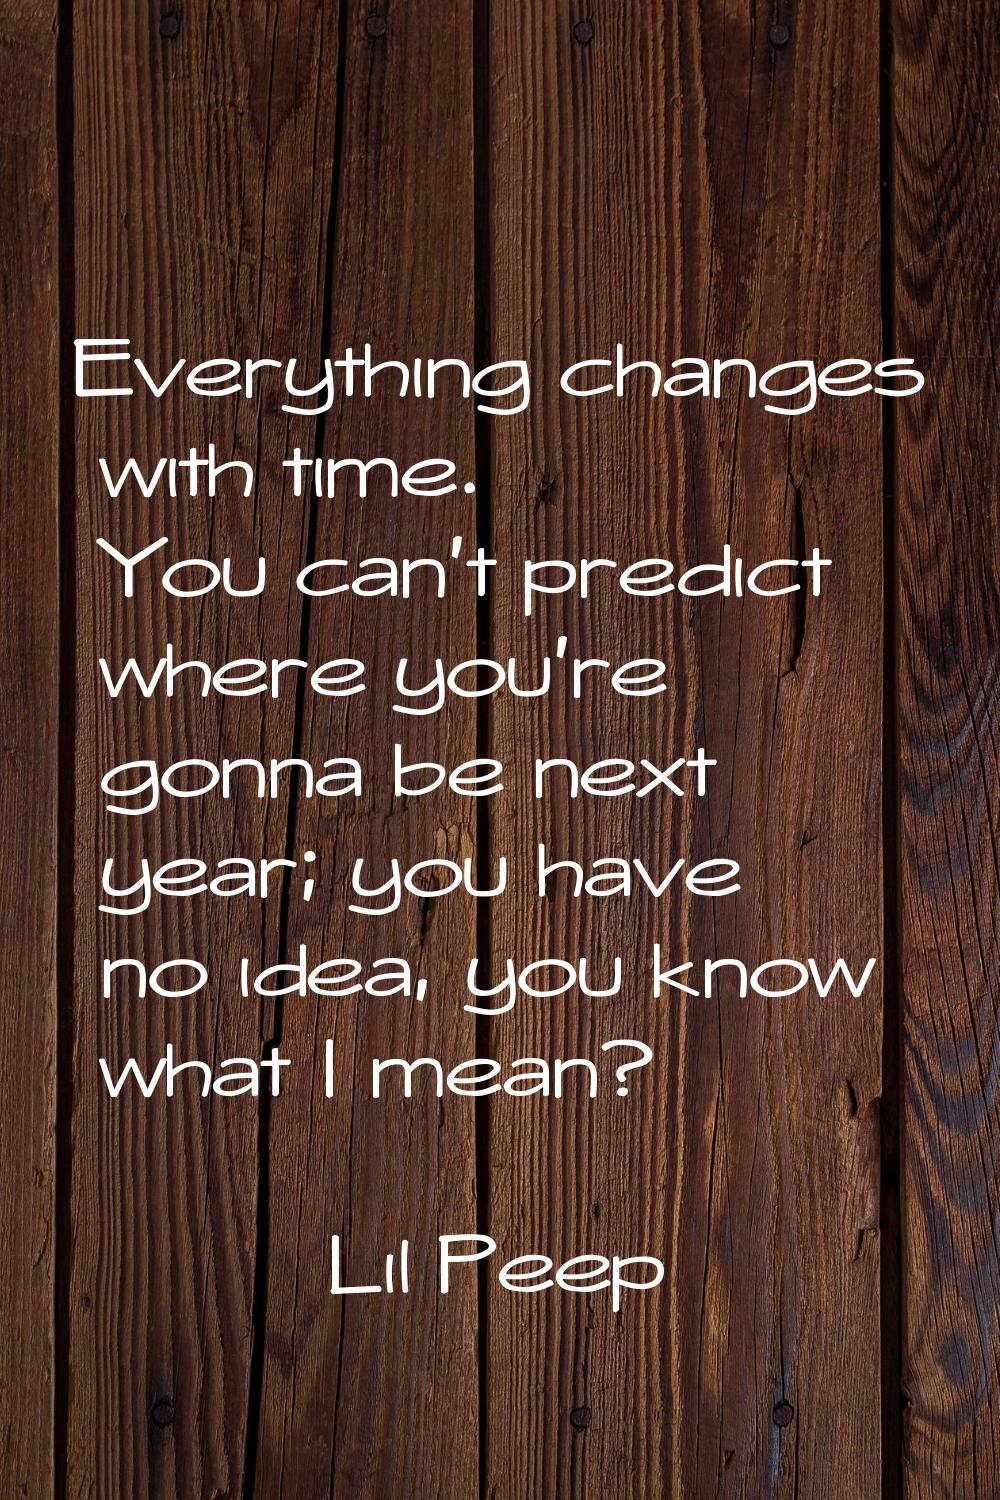 Everything changes with time. You can't predict where you're gonna be next year; you have no idea, 